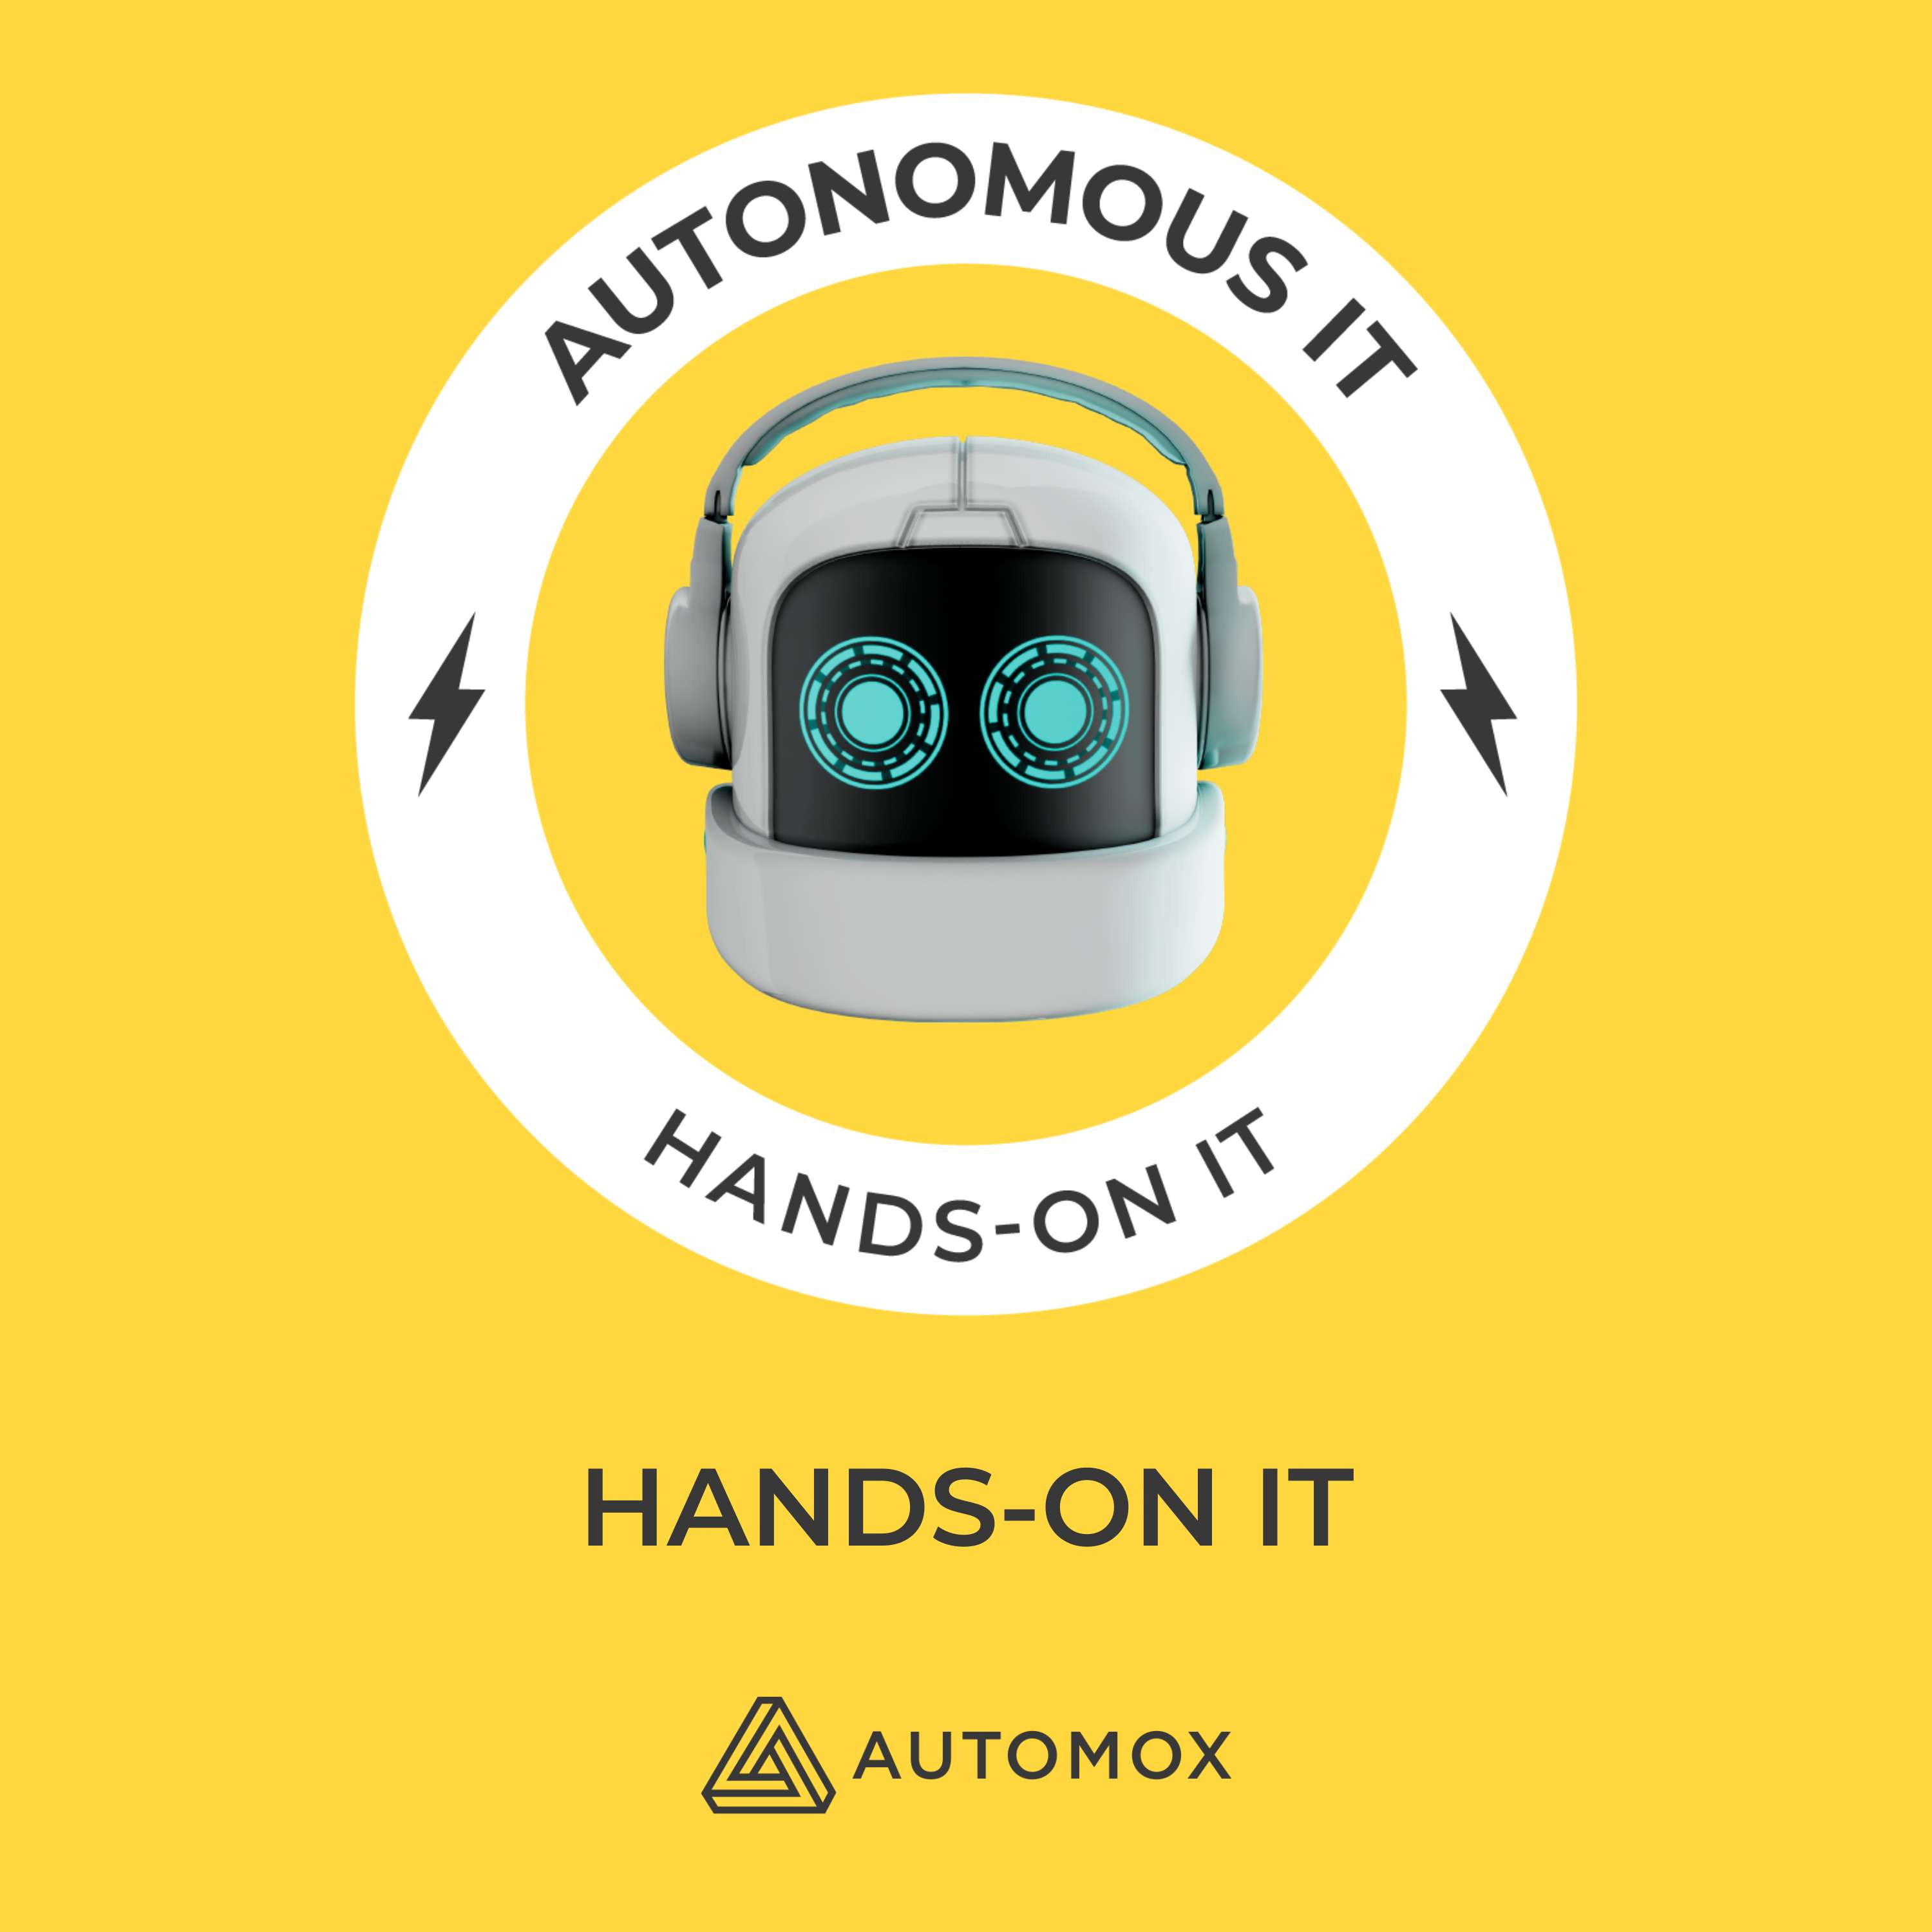 Hands On IT – Virtualization, IT Support, and... Home Labs? How Automox Techies Use Automox, E07